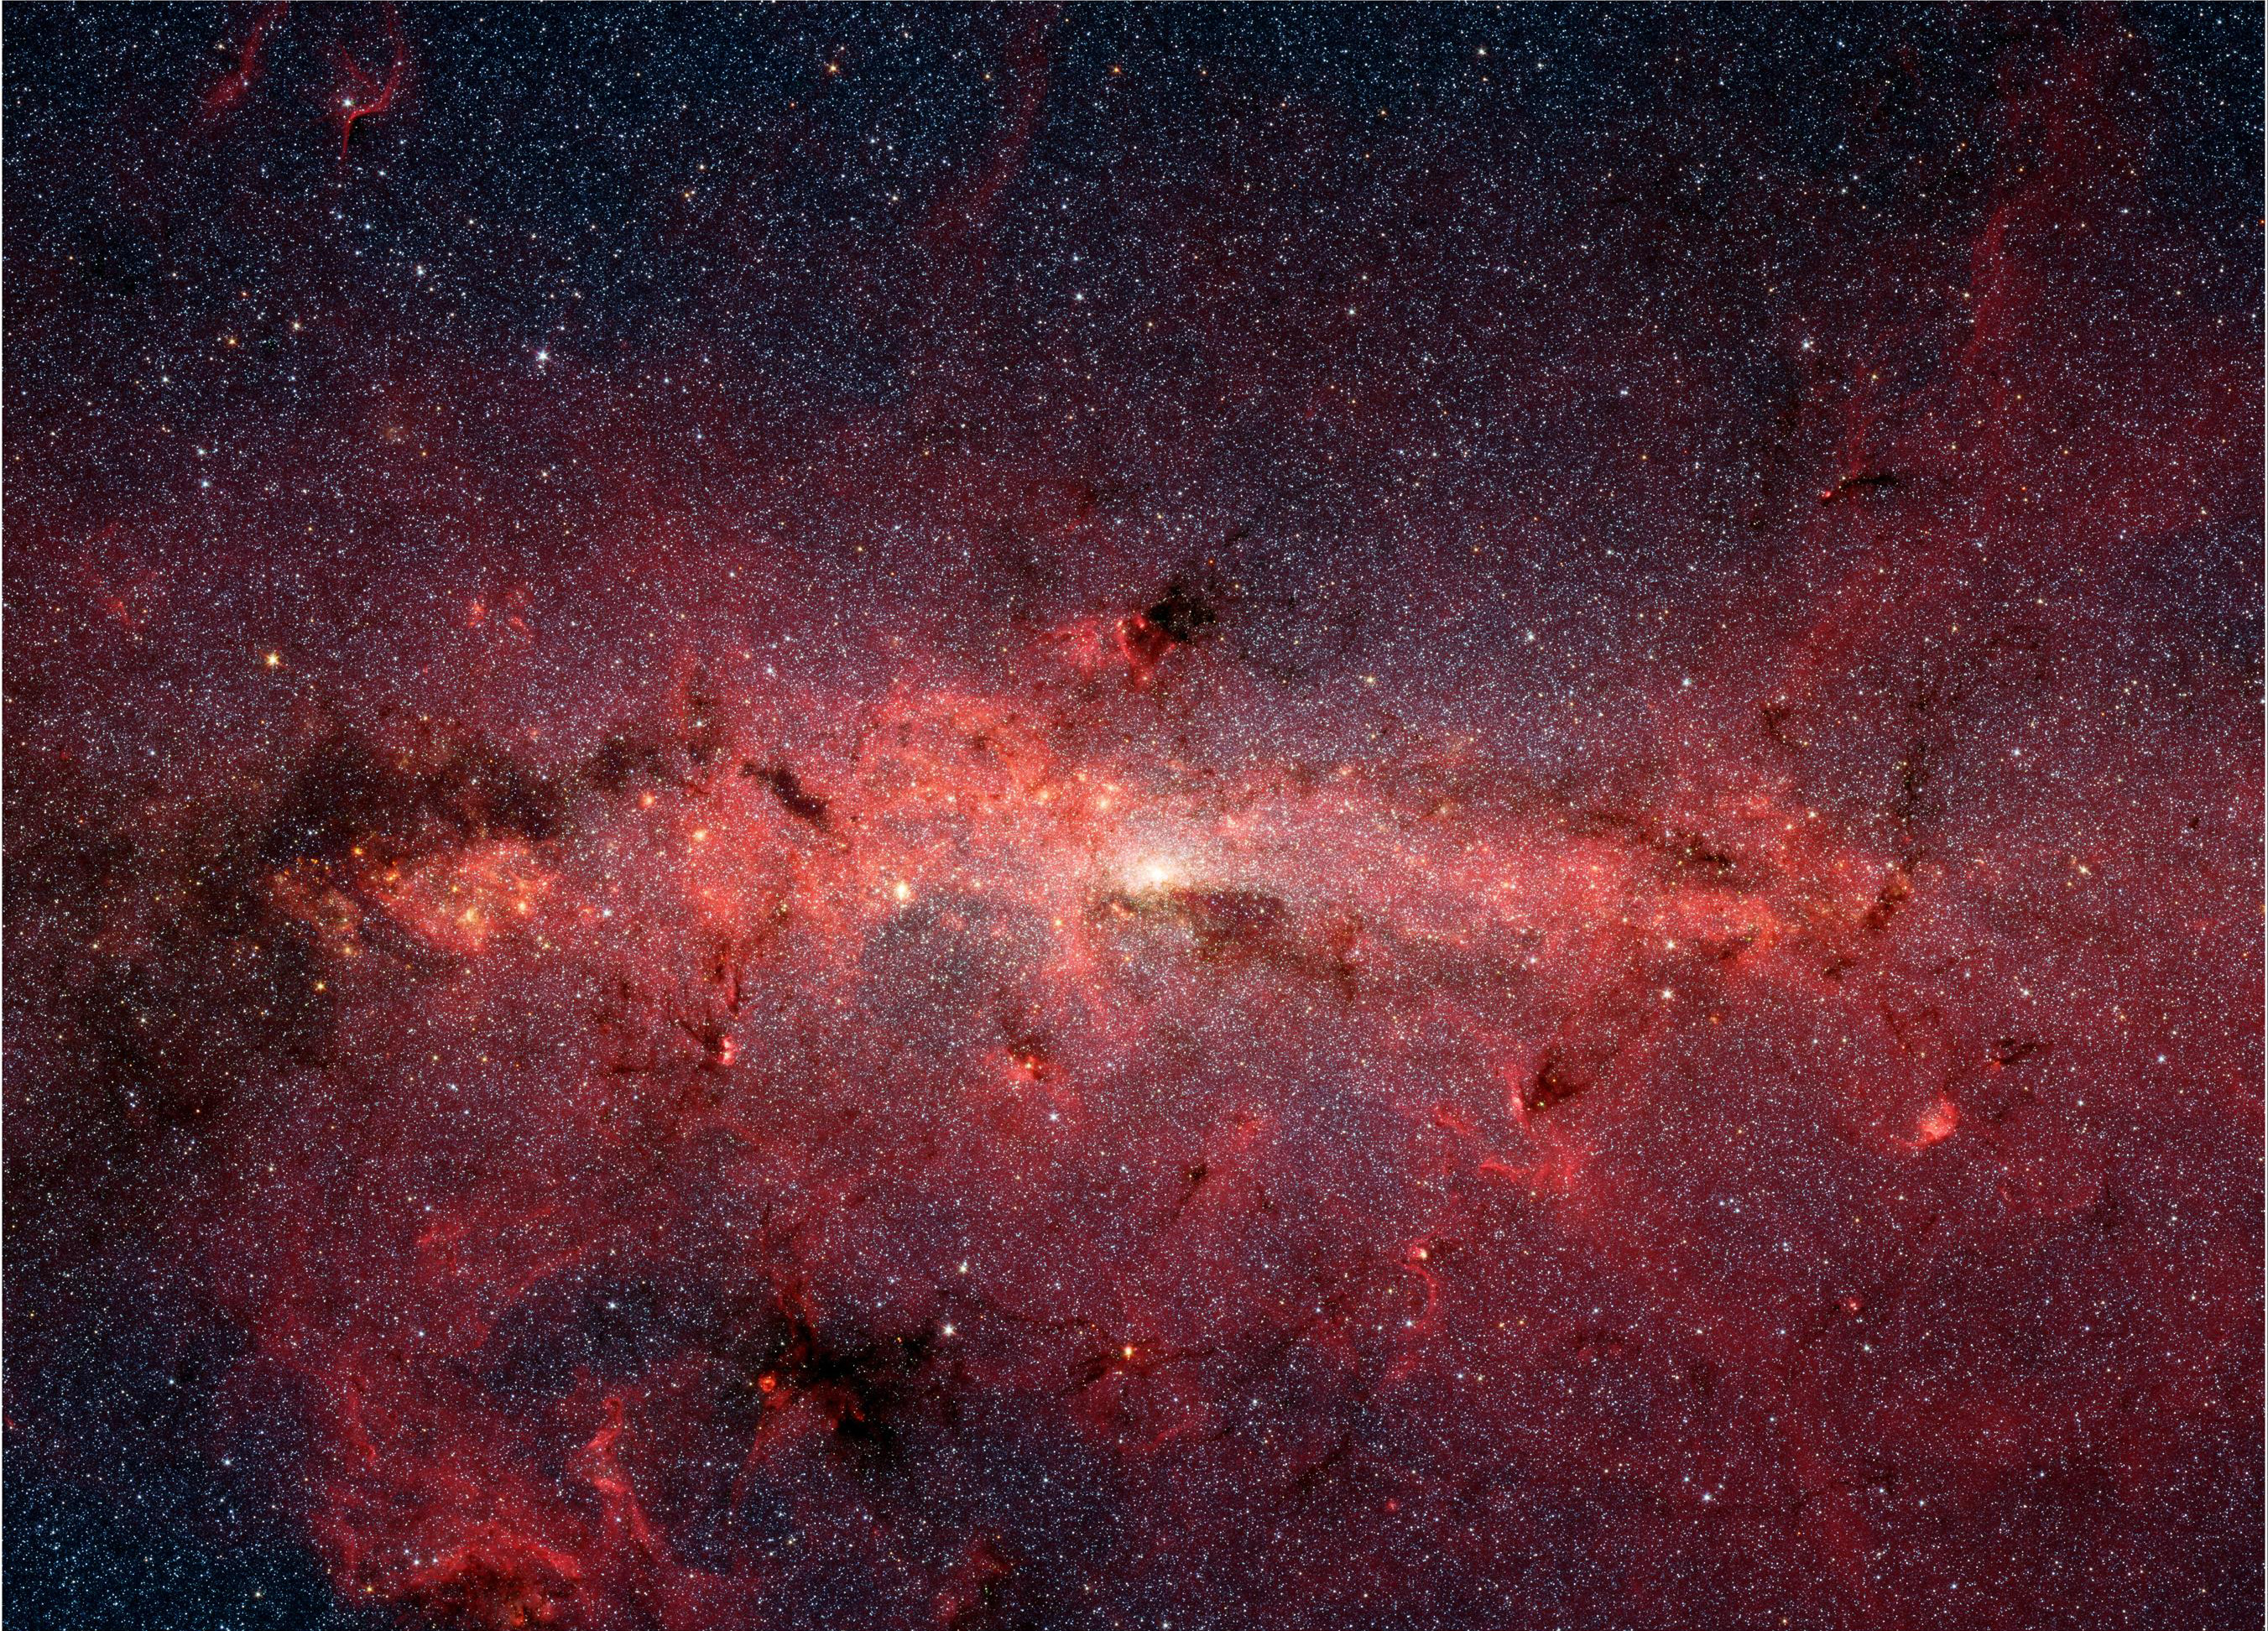 The Spitzer Space Telescope's infrared cameras reveals the stars of the crowded galactic center region of the Milky Way. (NASA / MCT / Getty Images)